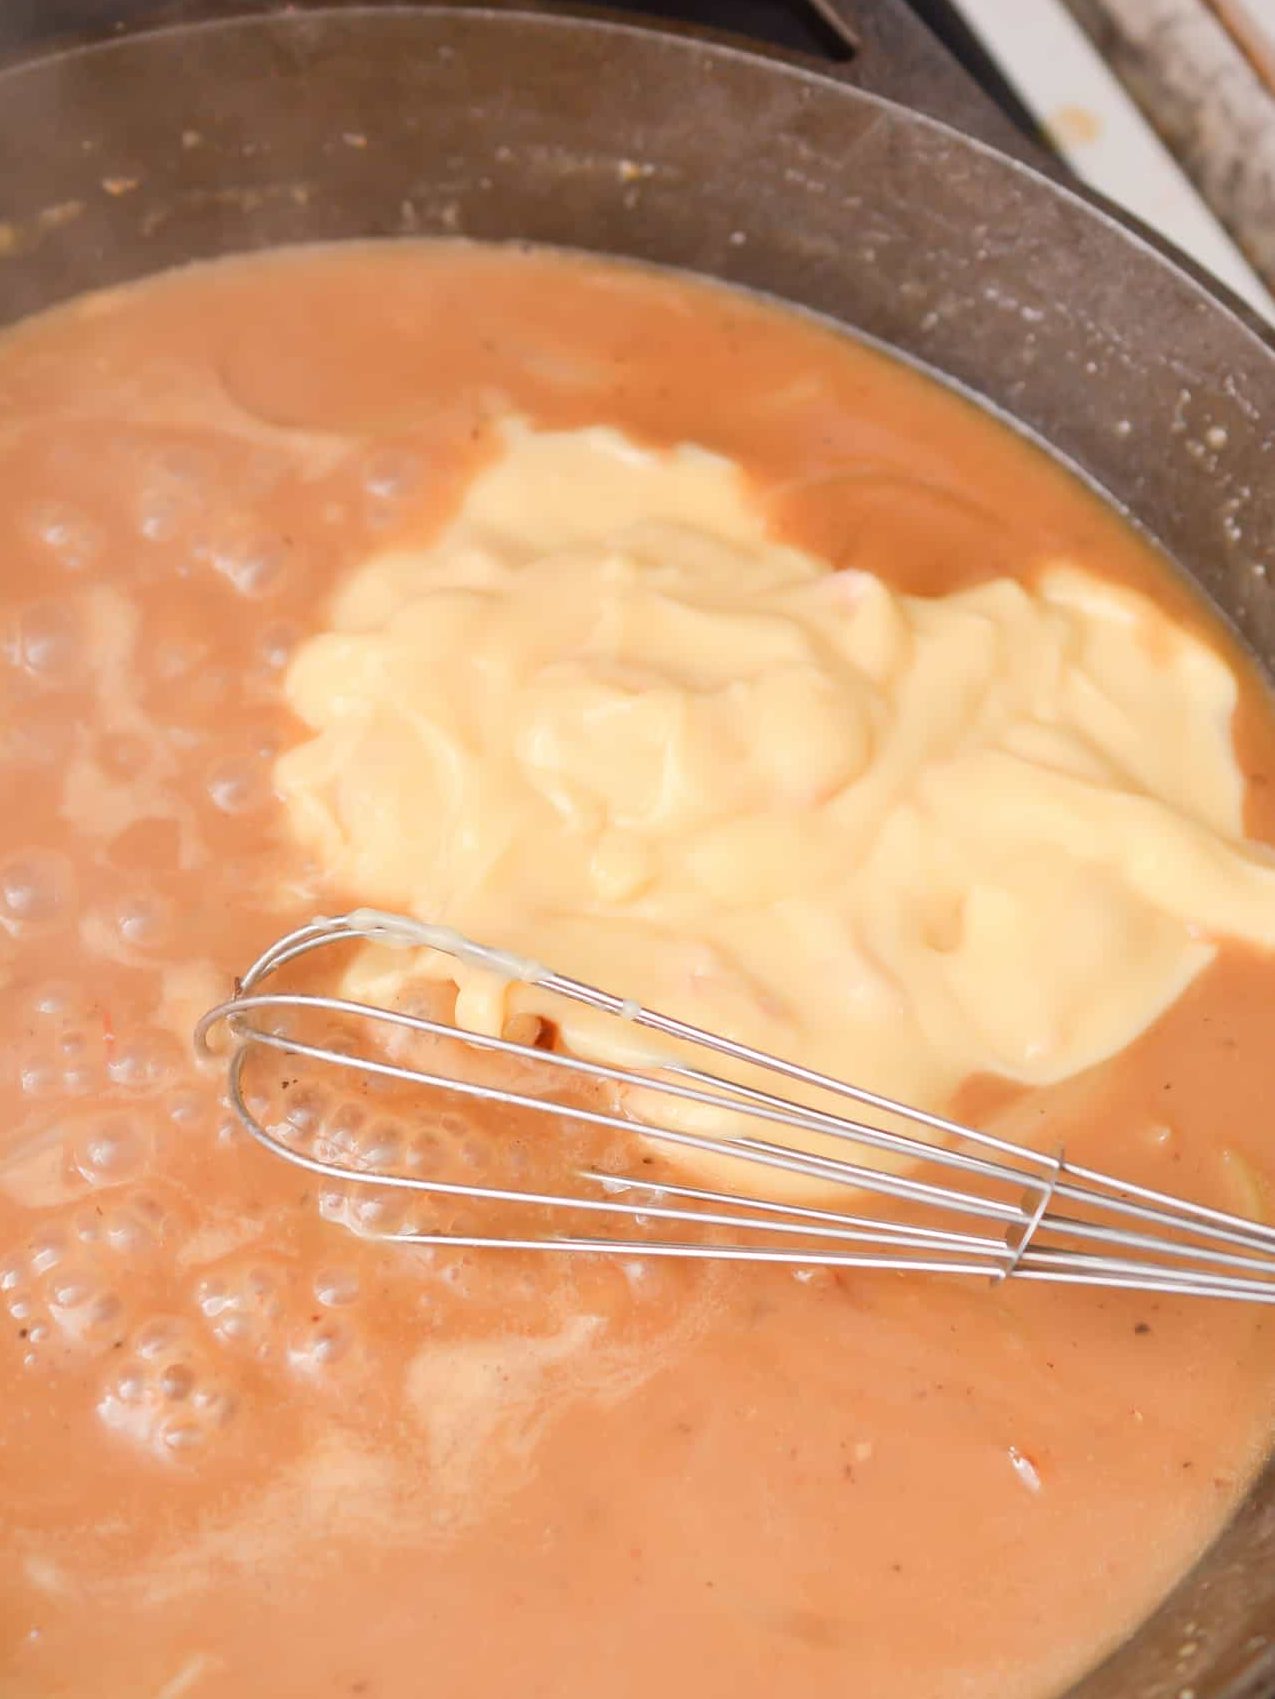 Pour the soup into the skillet, and whisk to combine.